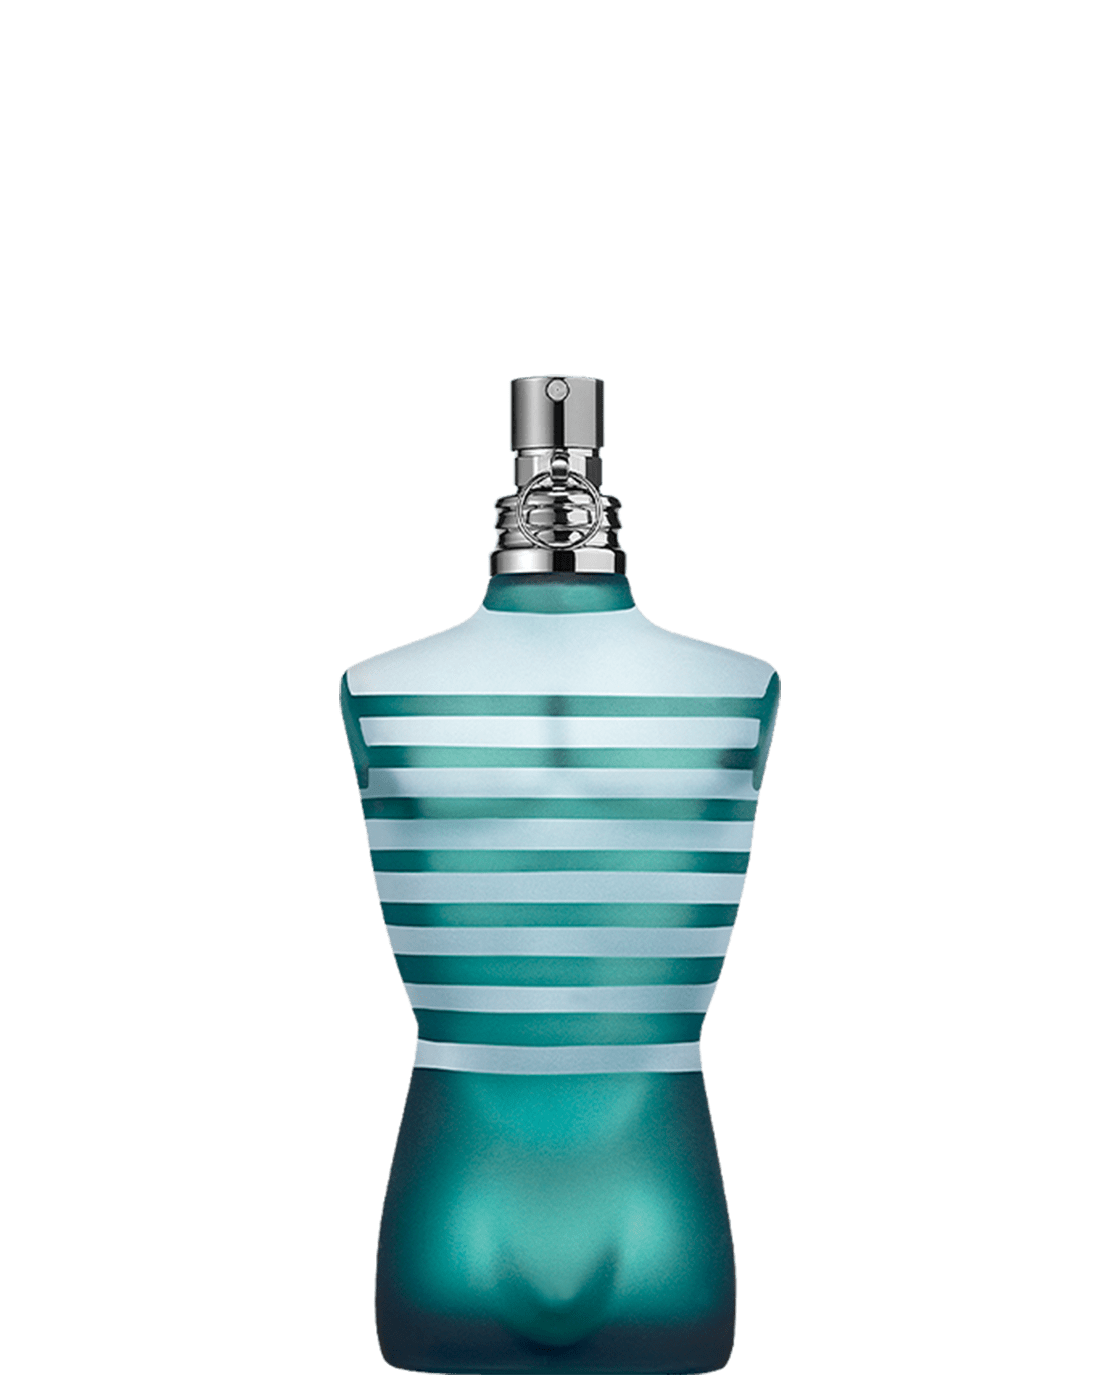 Real or fake Jean Paul Gaultier Ultra male? : r/Perfumes